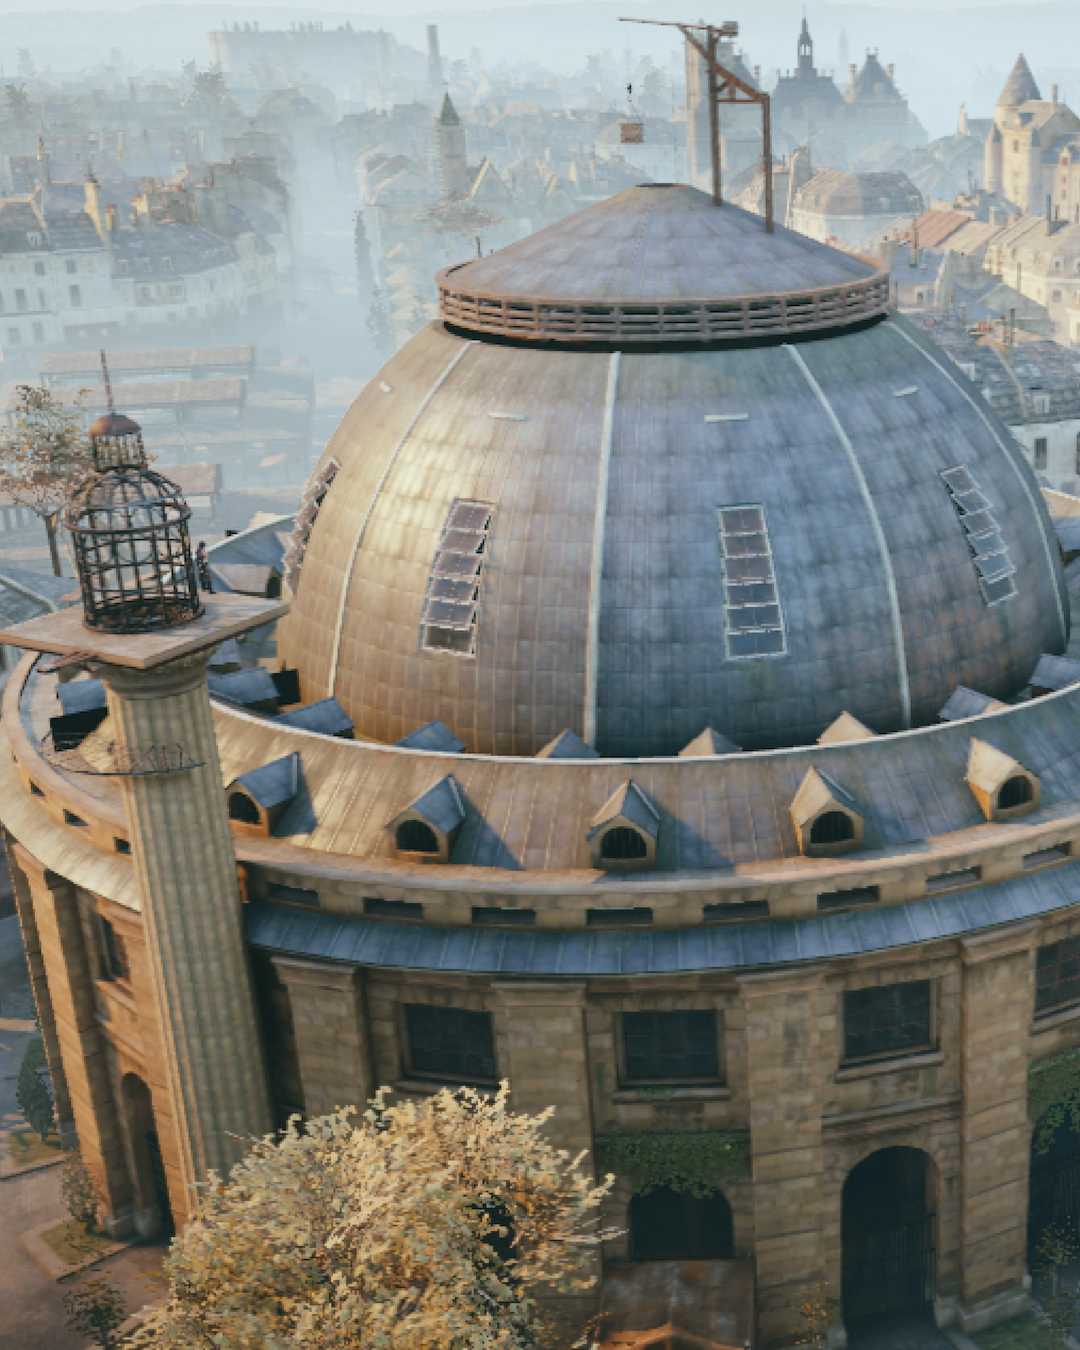 Assassin's Creed: Unity - Plugged In